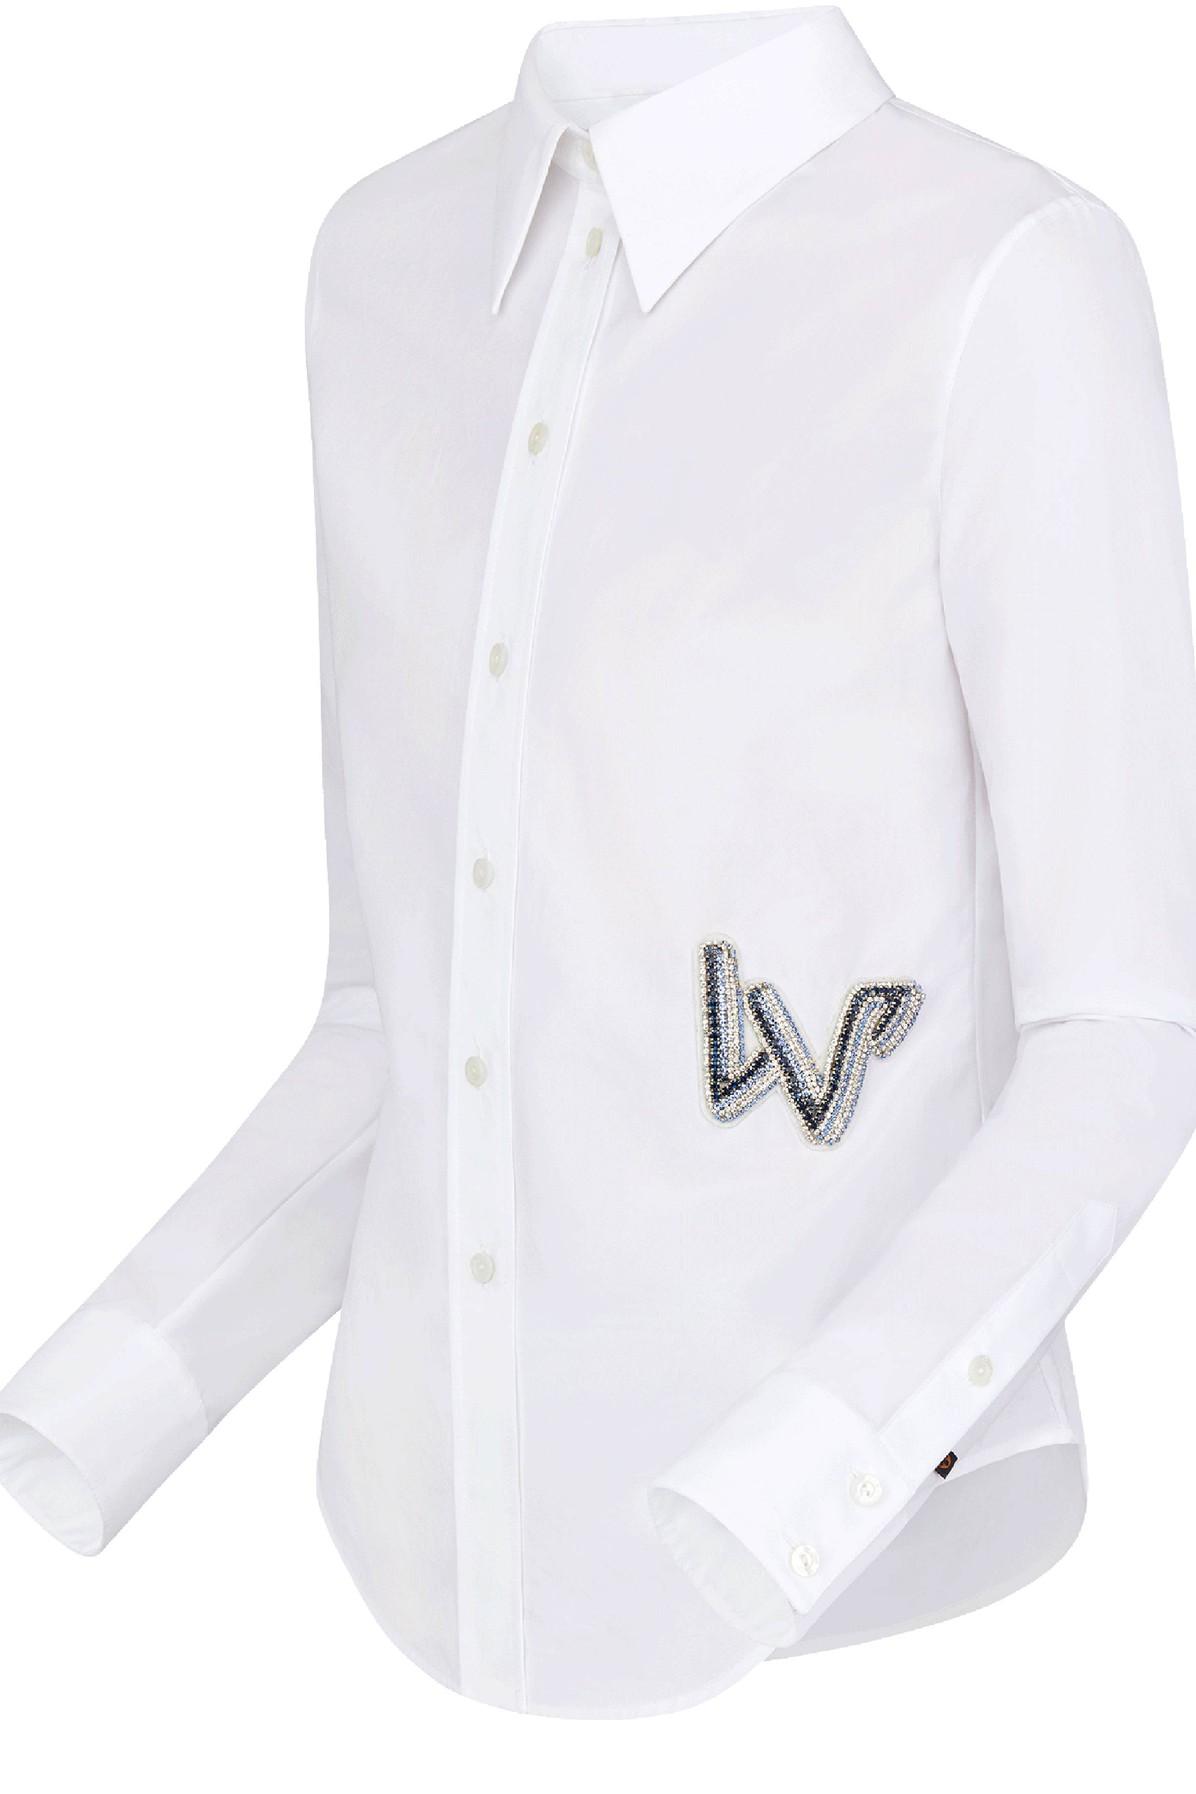 louis vuitton embroidered shirt